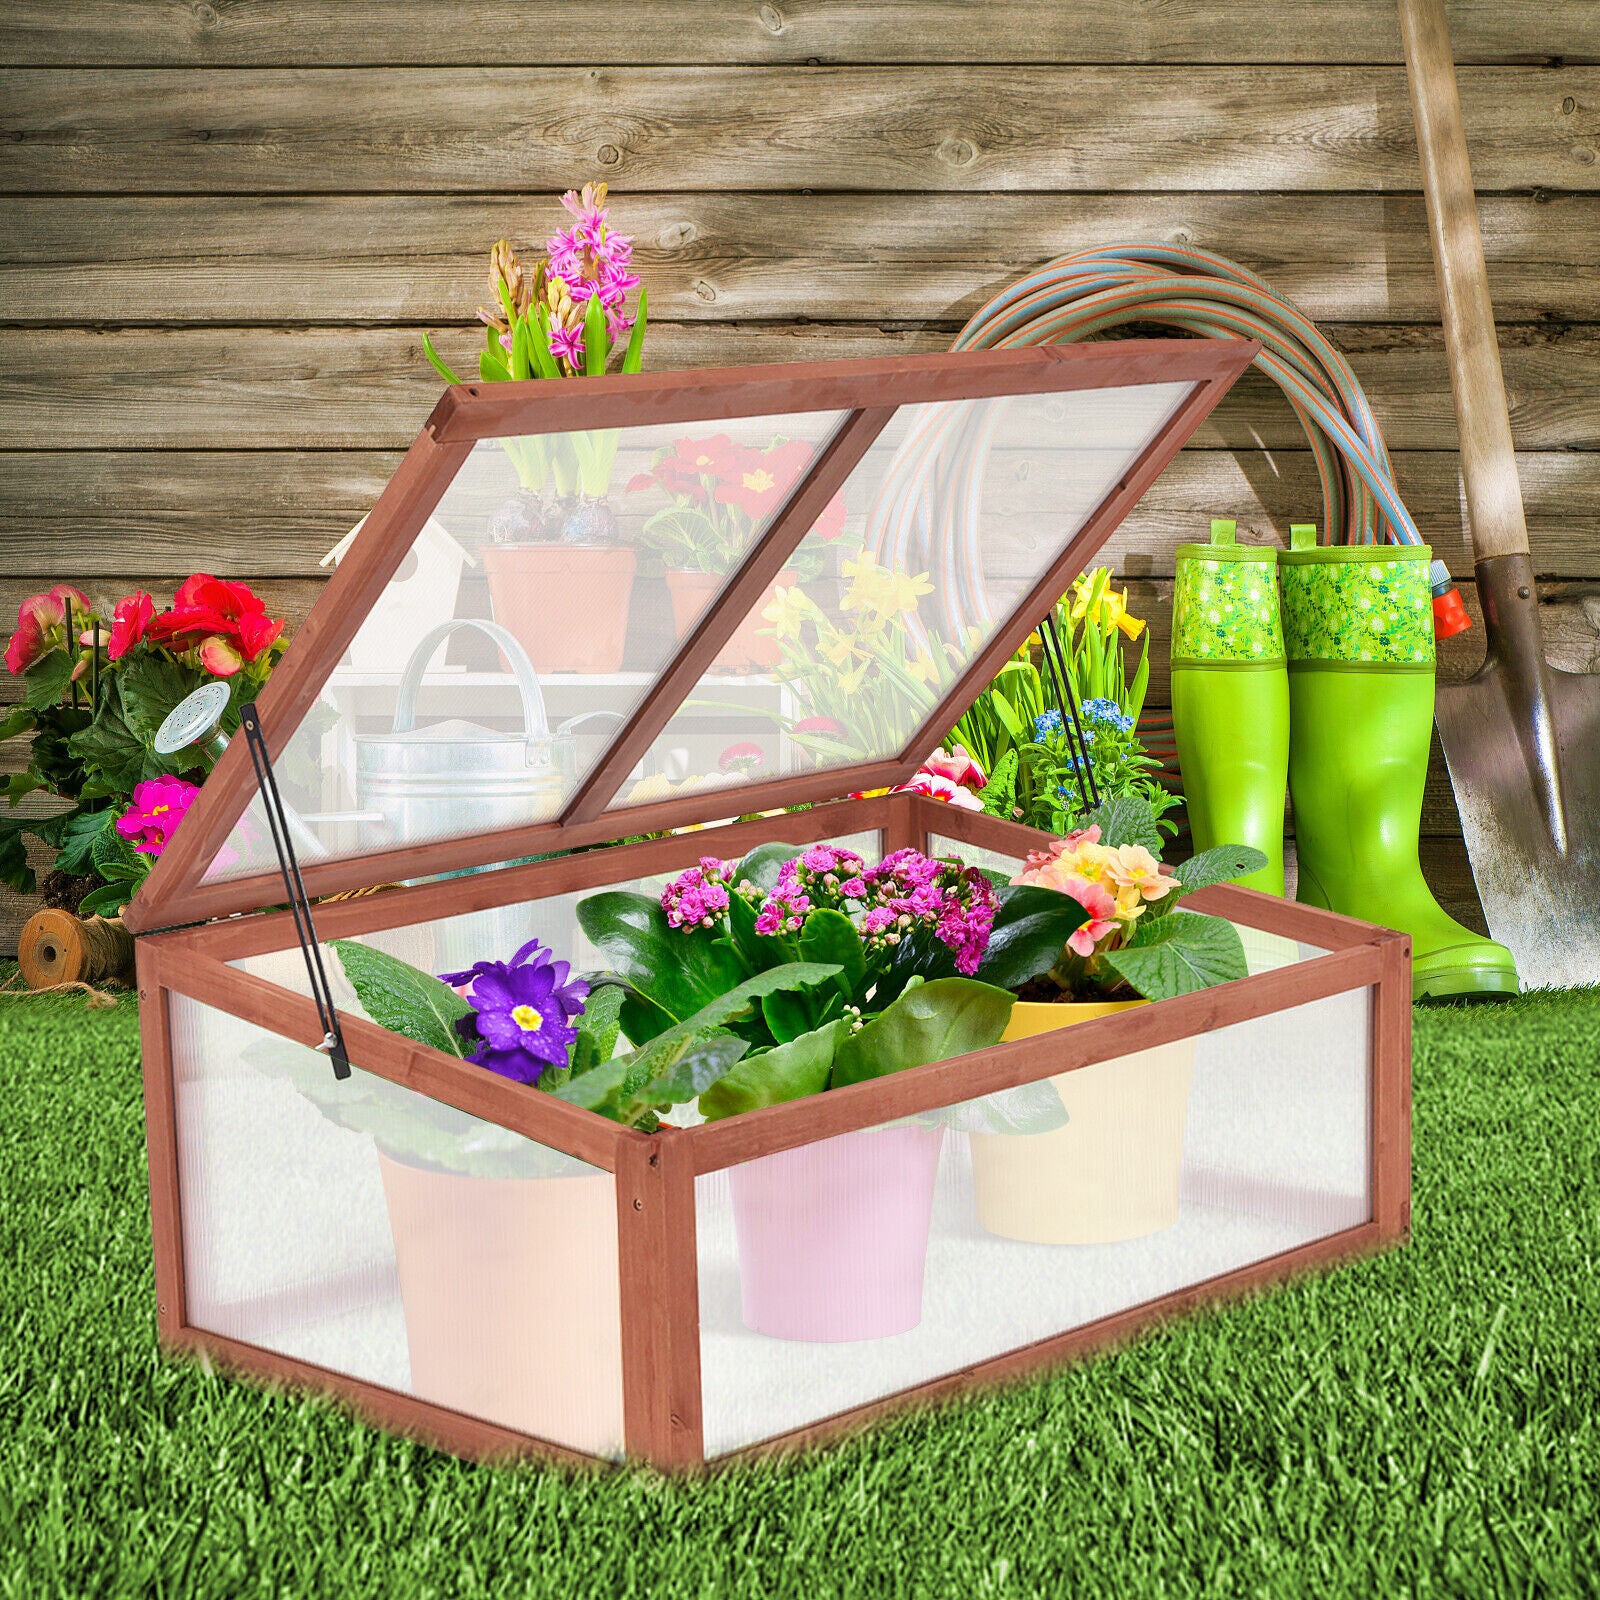 Mini Wooden Cold Frame Portable Garden Greenhouse Plants Flowers Bed